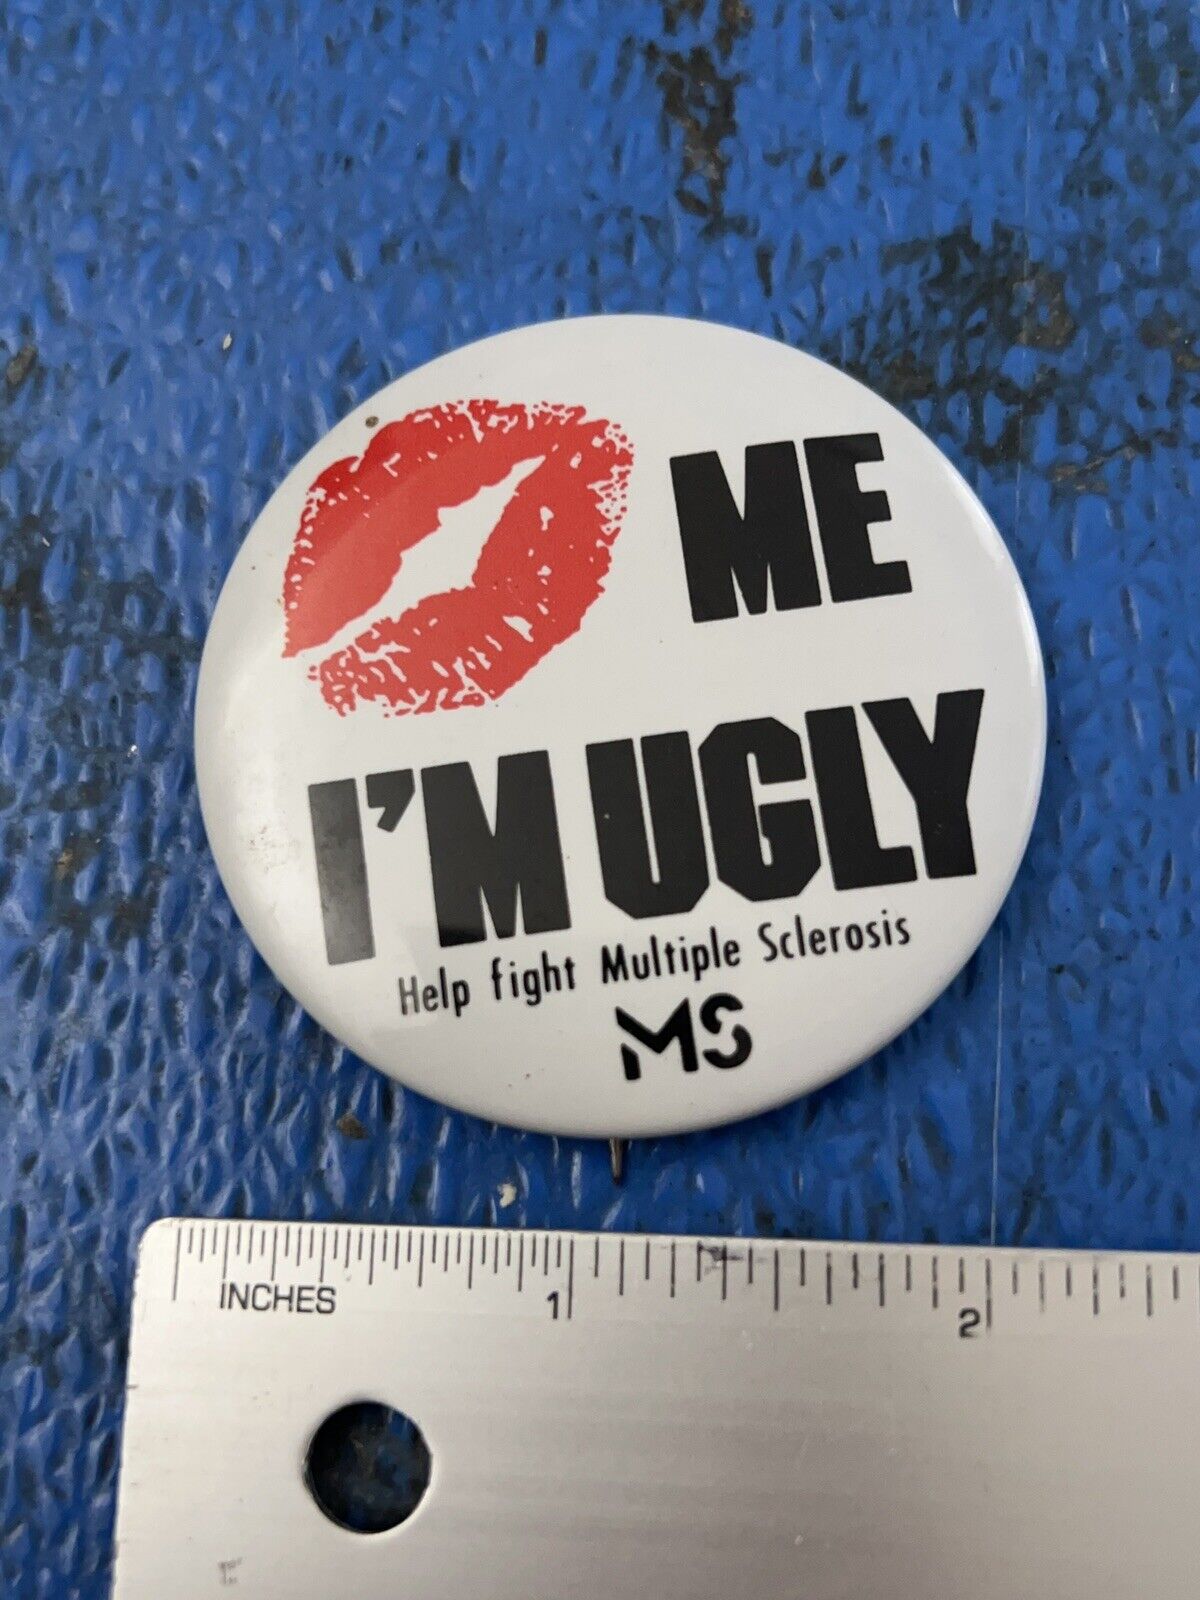 Vintage Kiss ME I'M UGLY Help Fight Multiple Sclerosis MS 2 1/4" Pin Button Без бренда